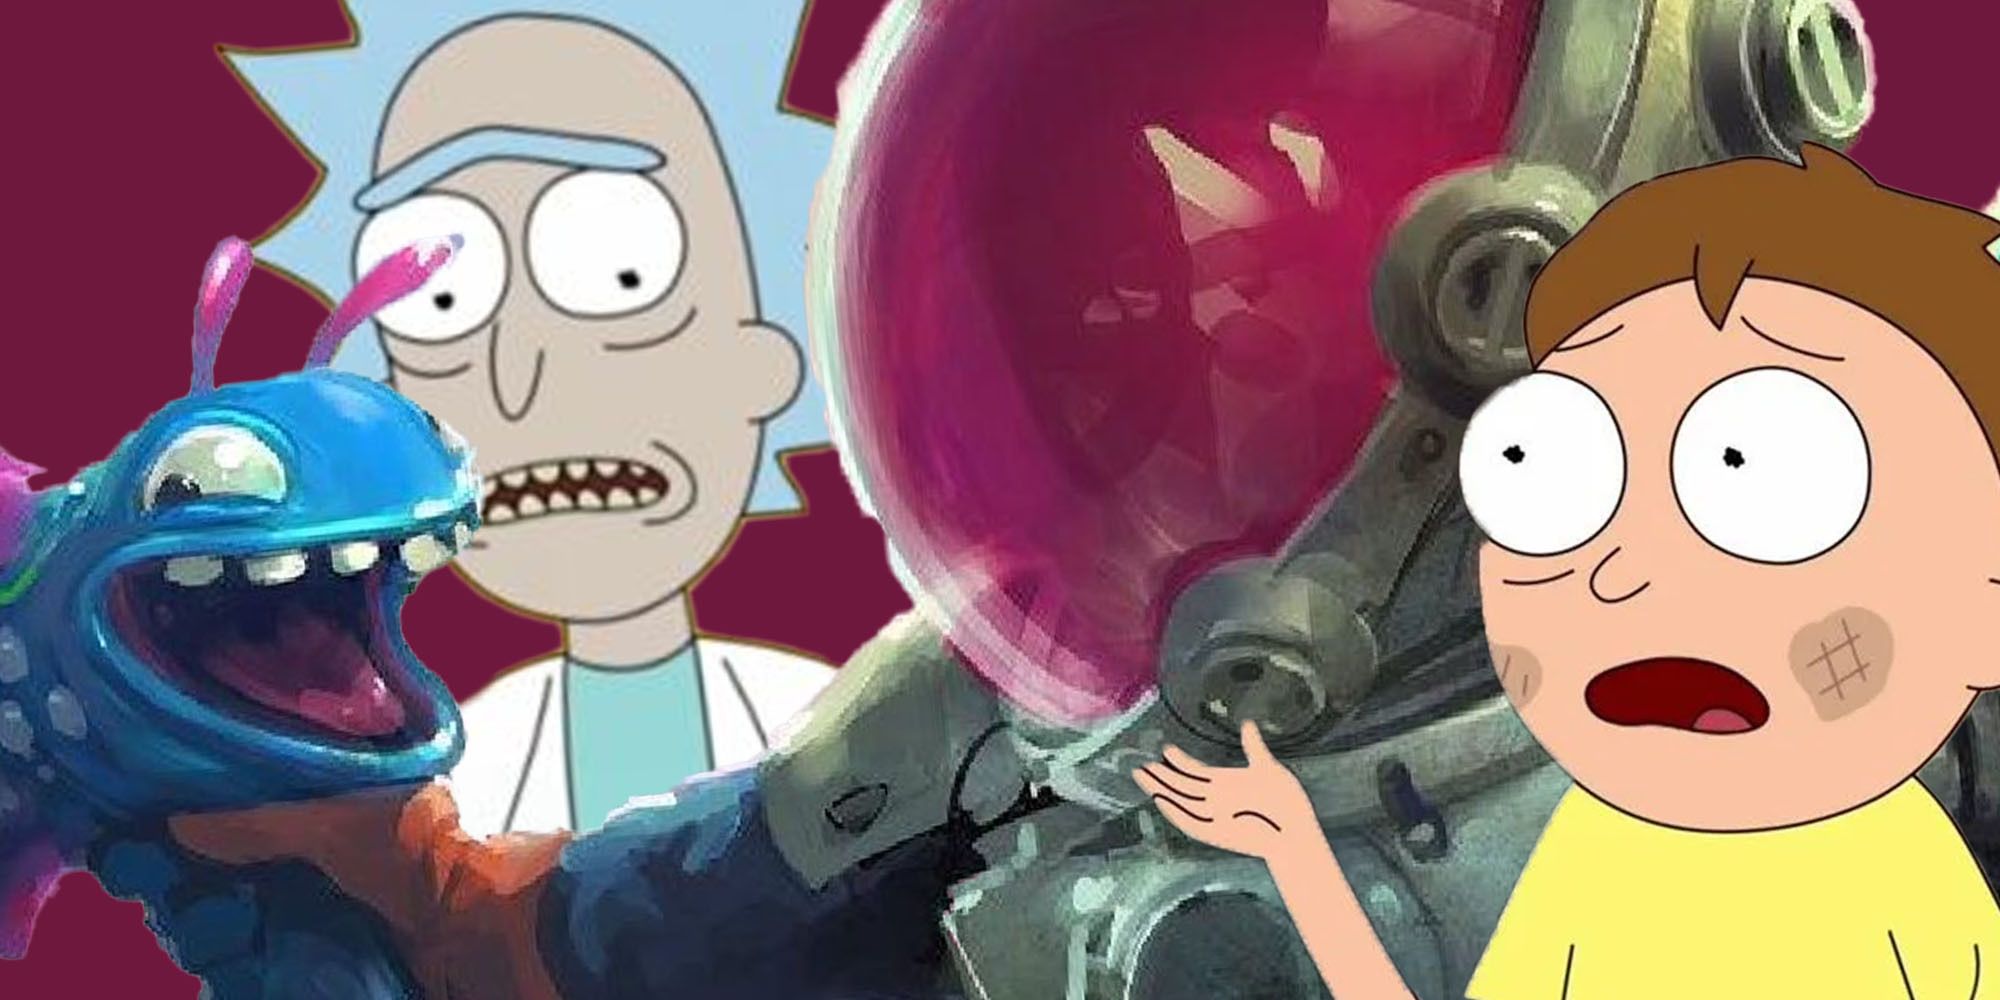 High on Life monsters with Rick and Morty